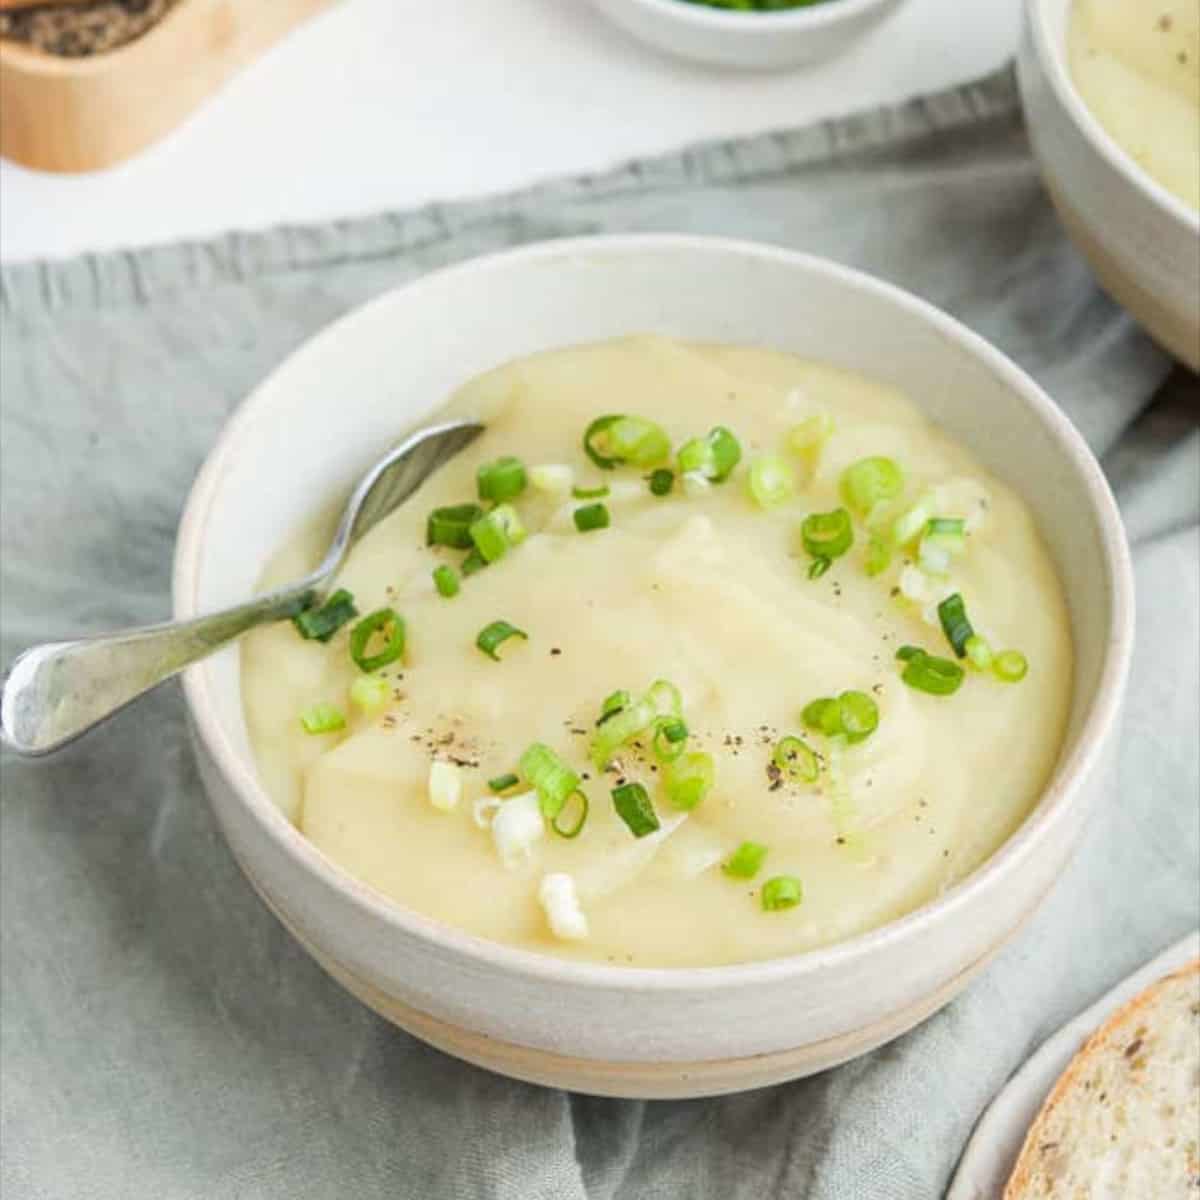 A white bowl filled with thick creamy potato soup garnished with chives.